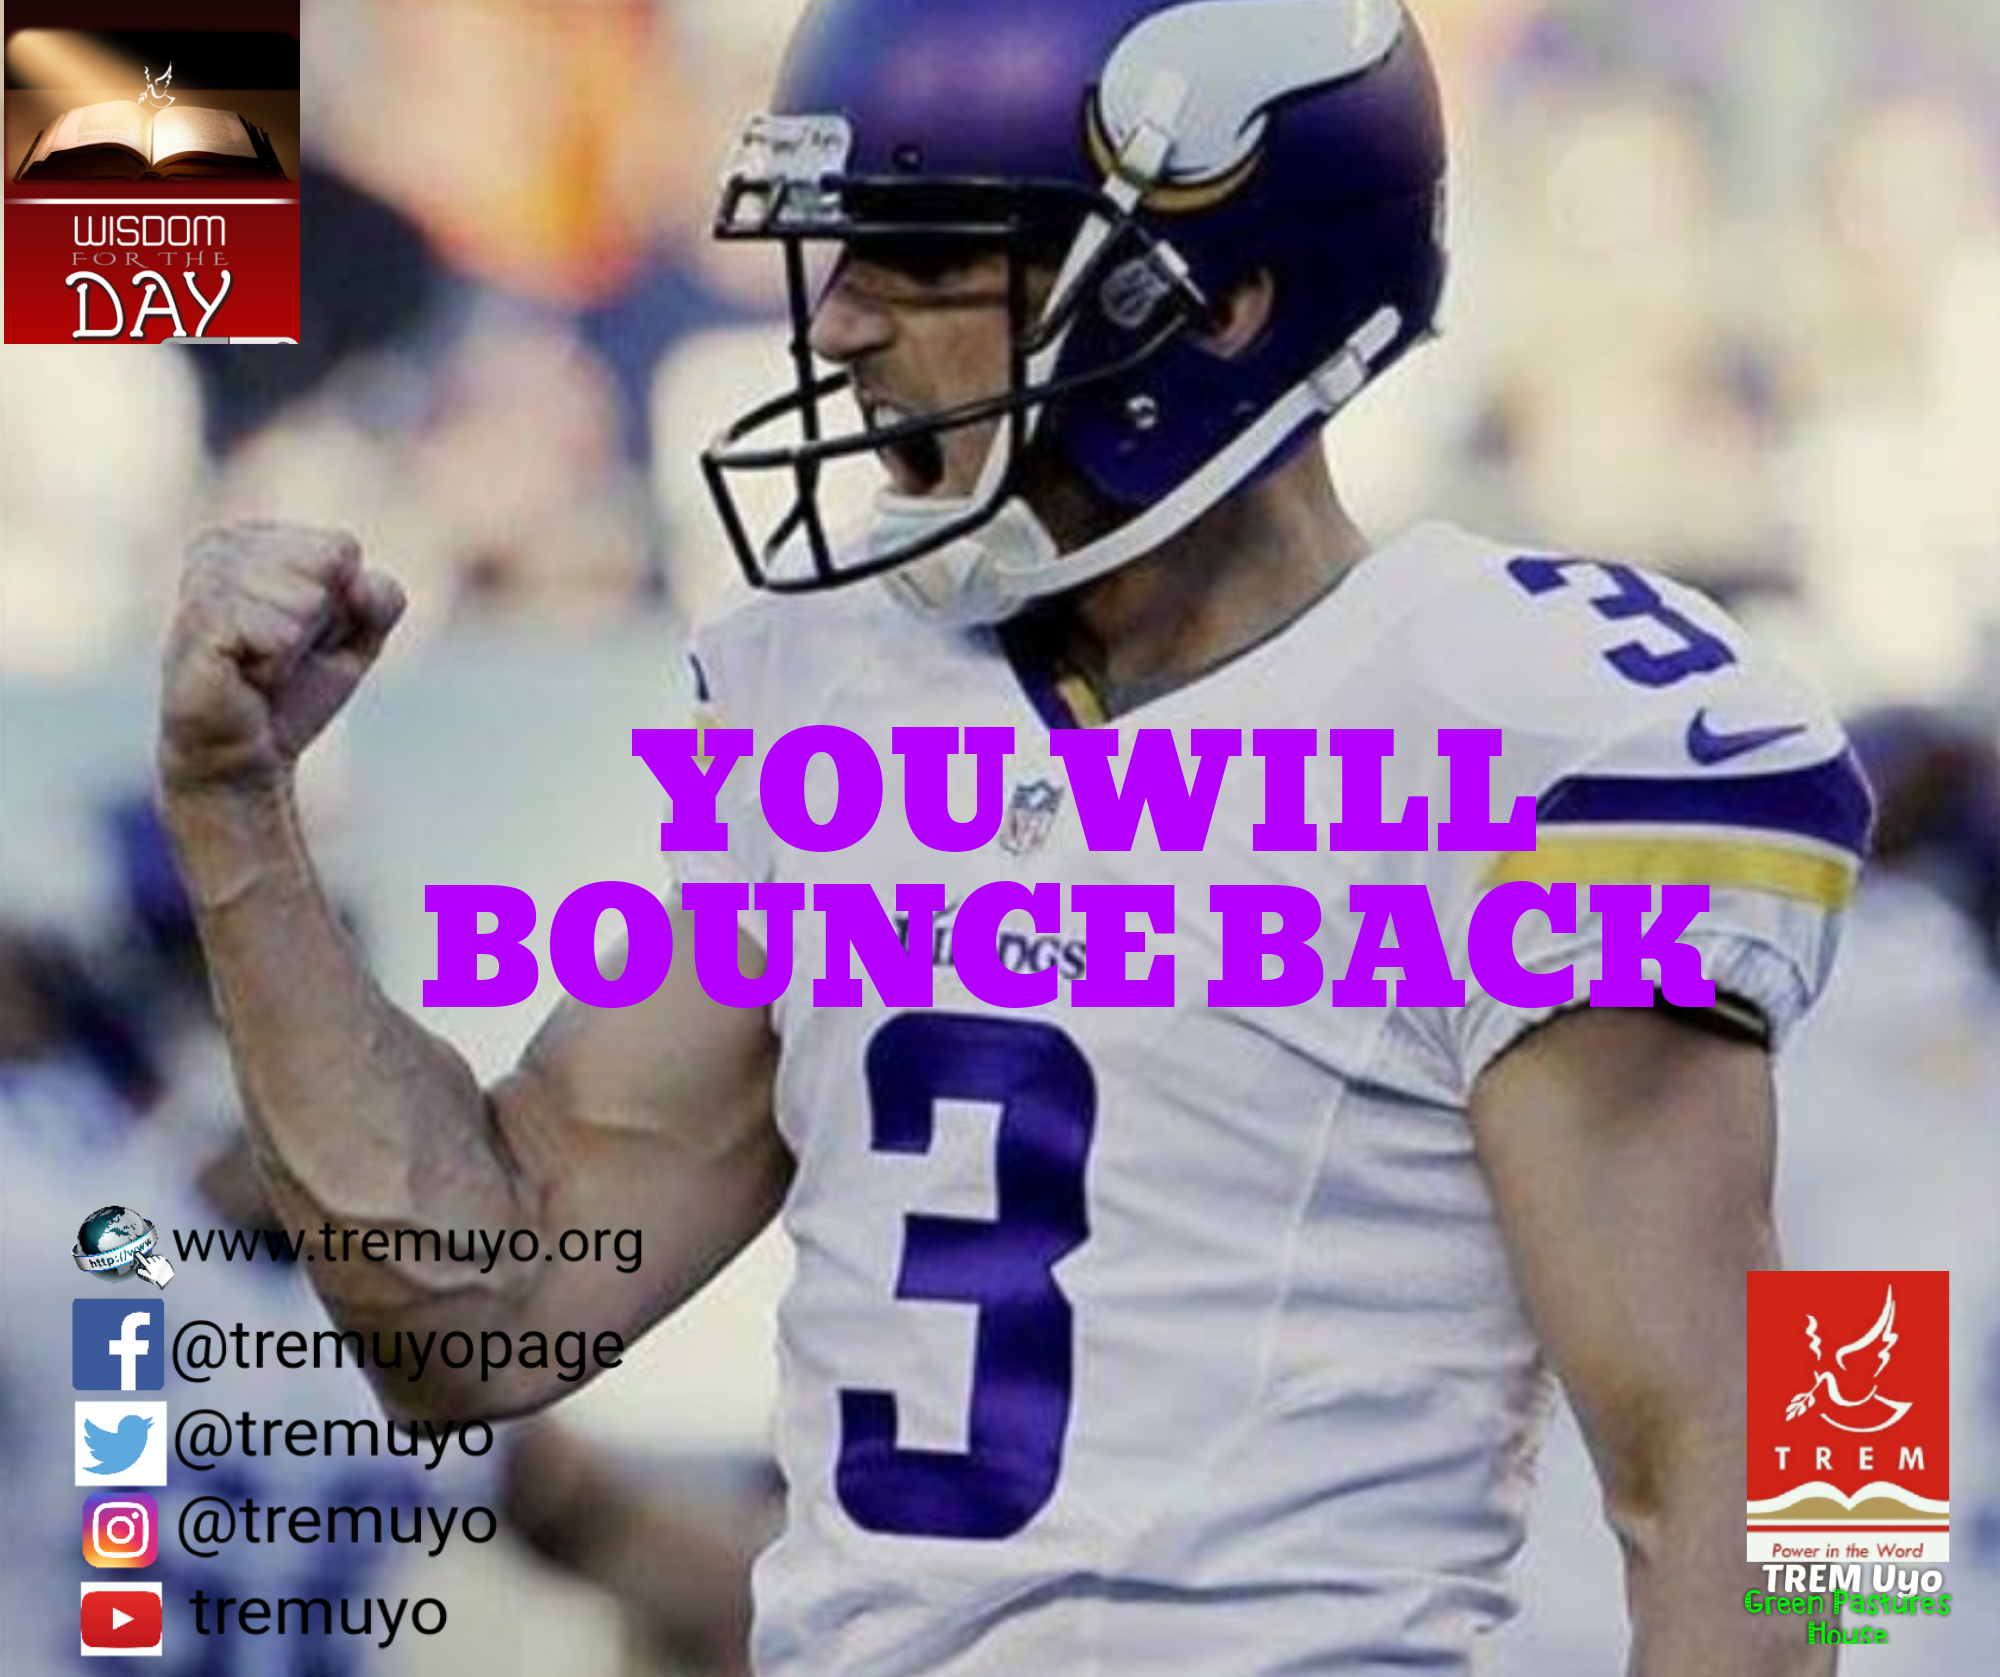 YOU WILL BOUNCE BACK